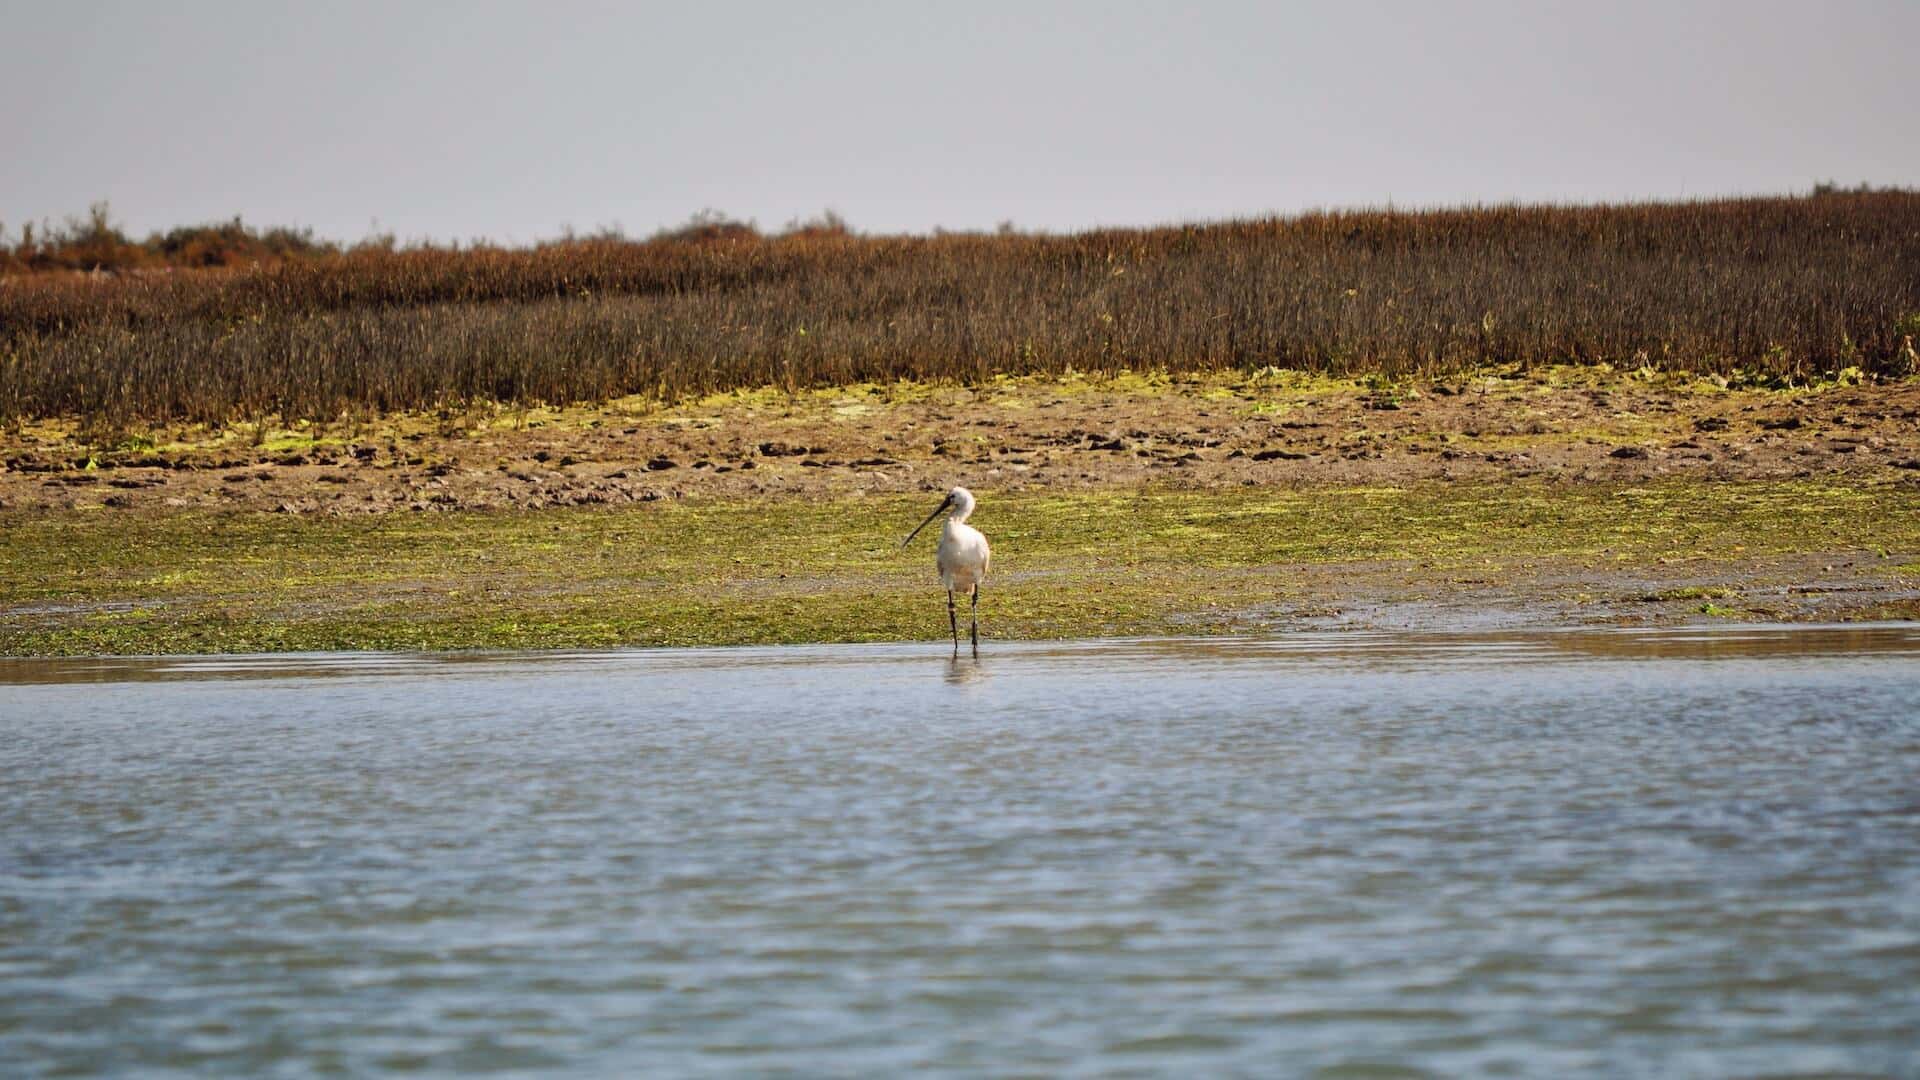 Ria Formosa is one the best places to observe Spoonbills in the Algarve